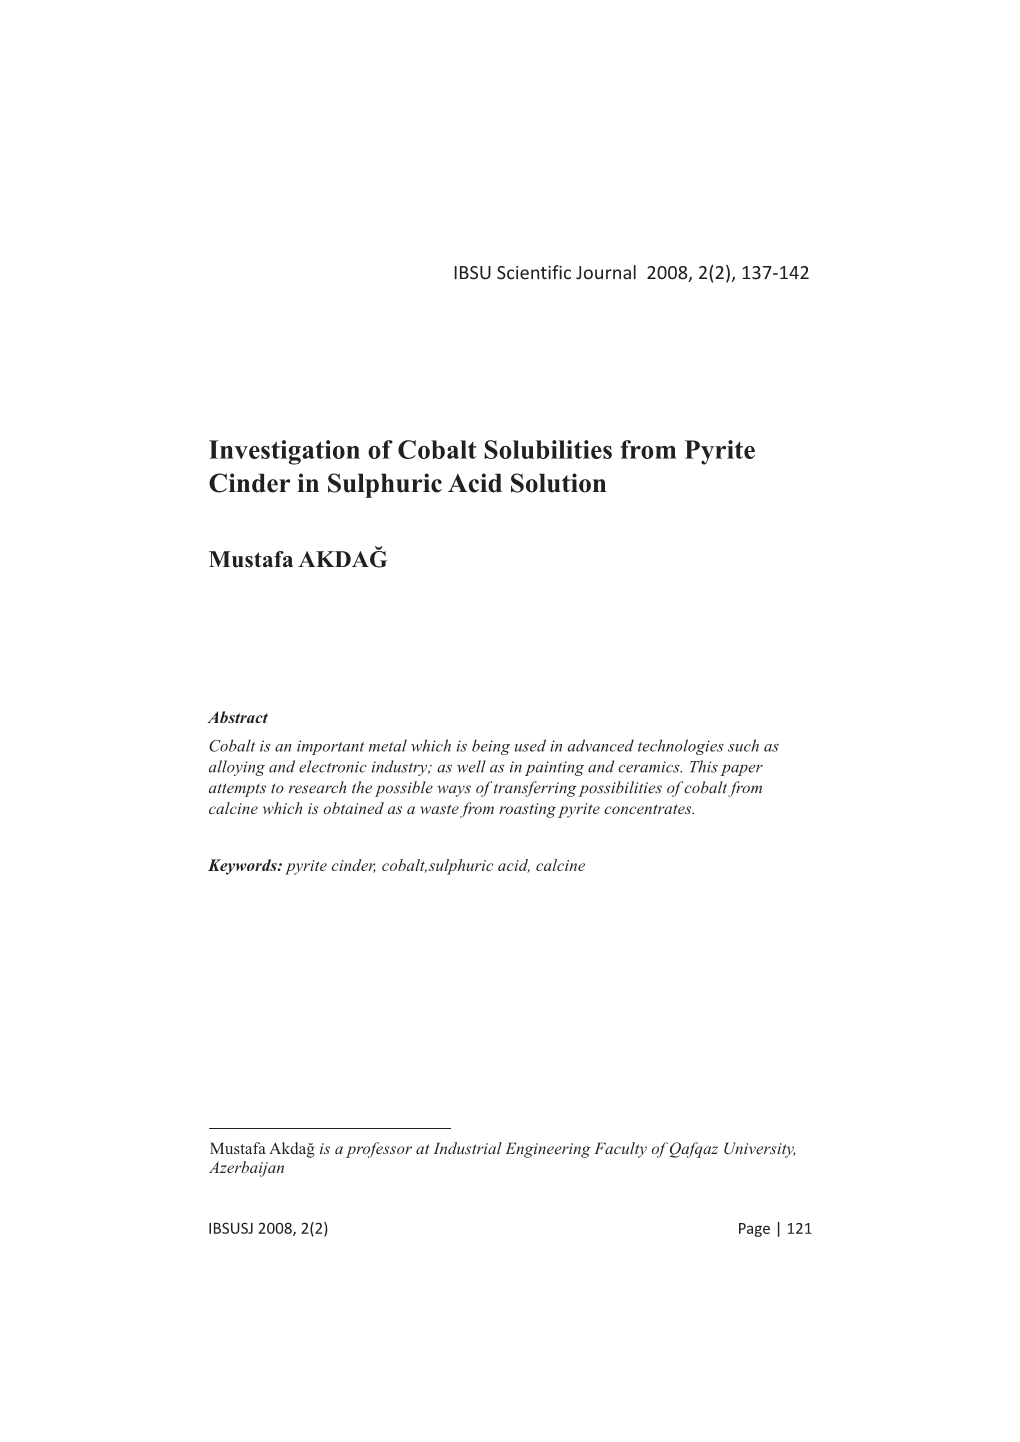 Investigation of Cobalt Solubilities from Pyrite Cinder in Sulphuric Acid Solution